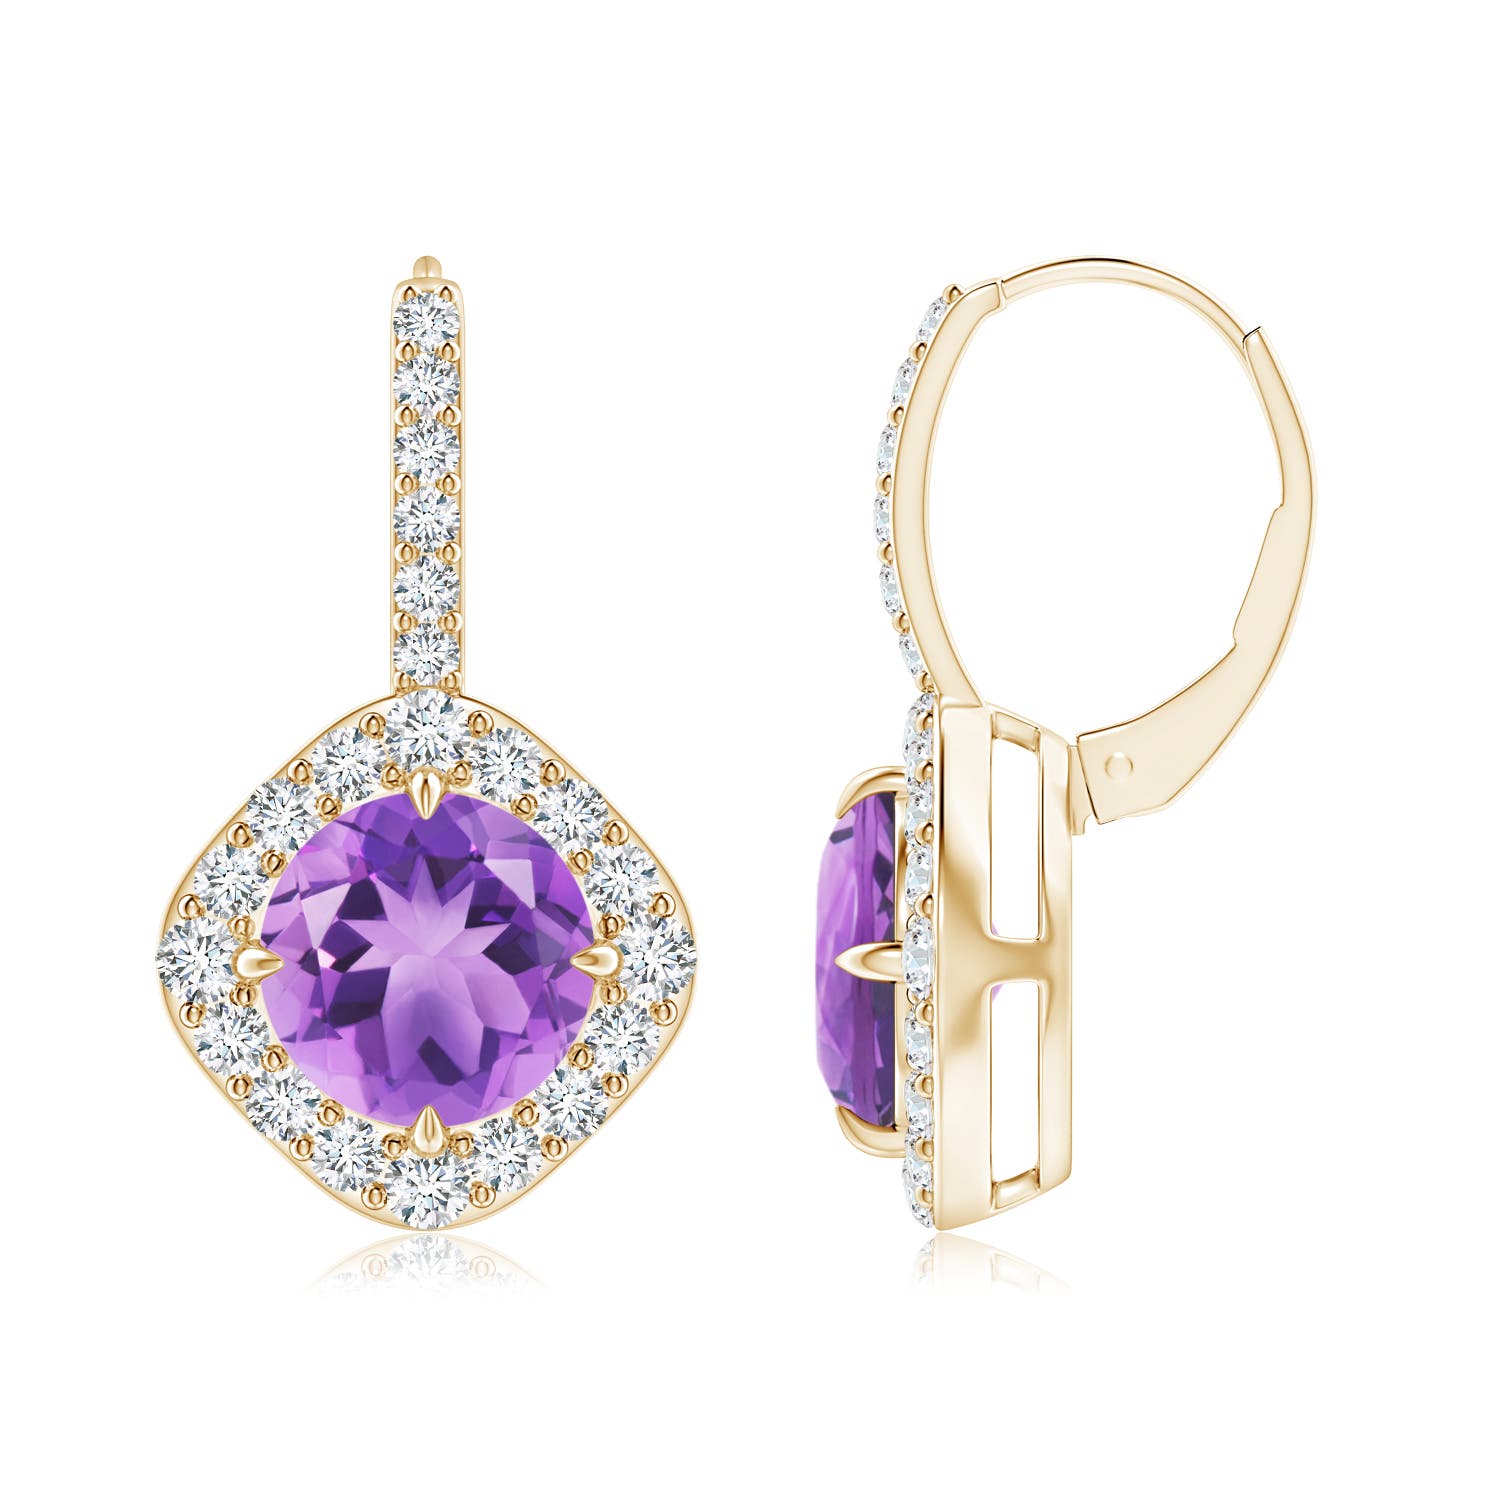 A - Amethyst / 4.15 CT / 14 KT Yellow Gold